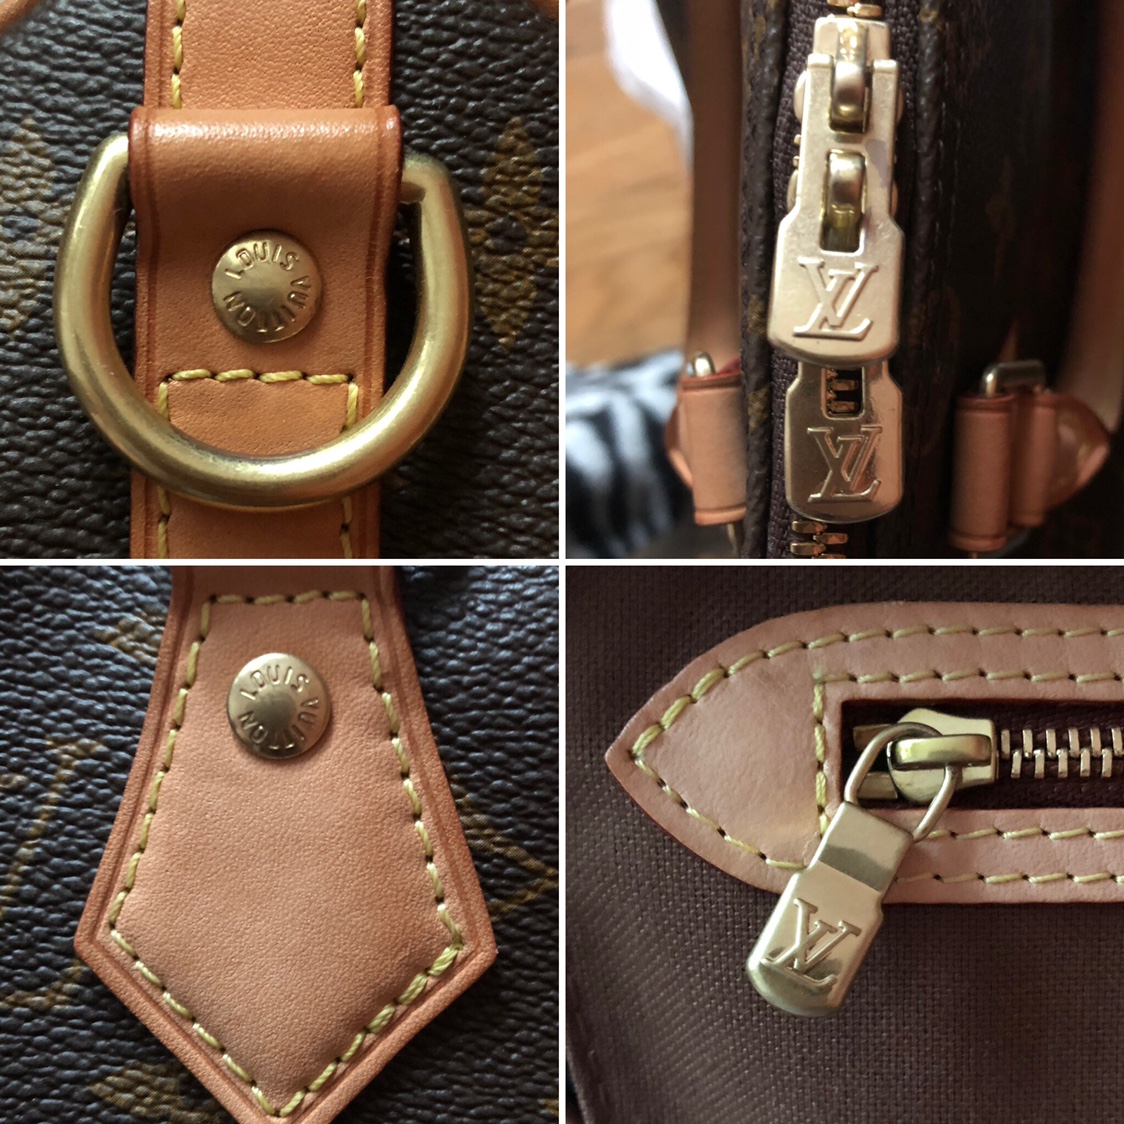 Authenticate This LOUIS VUITTON - READ 1ST POST BEFORE POSTING! | Page 1674 - PurseForum